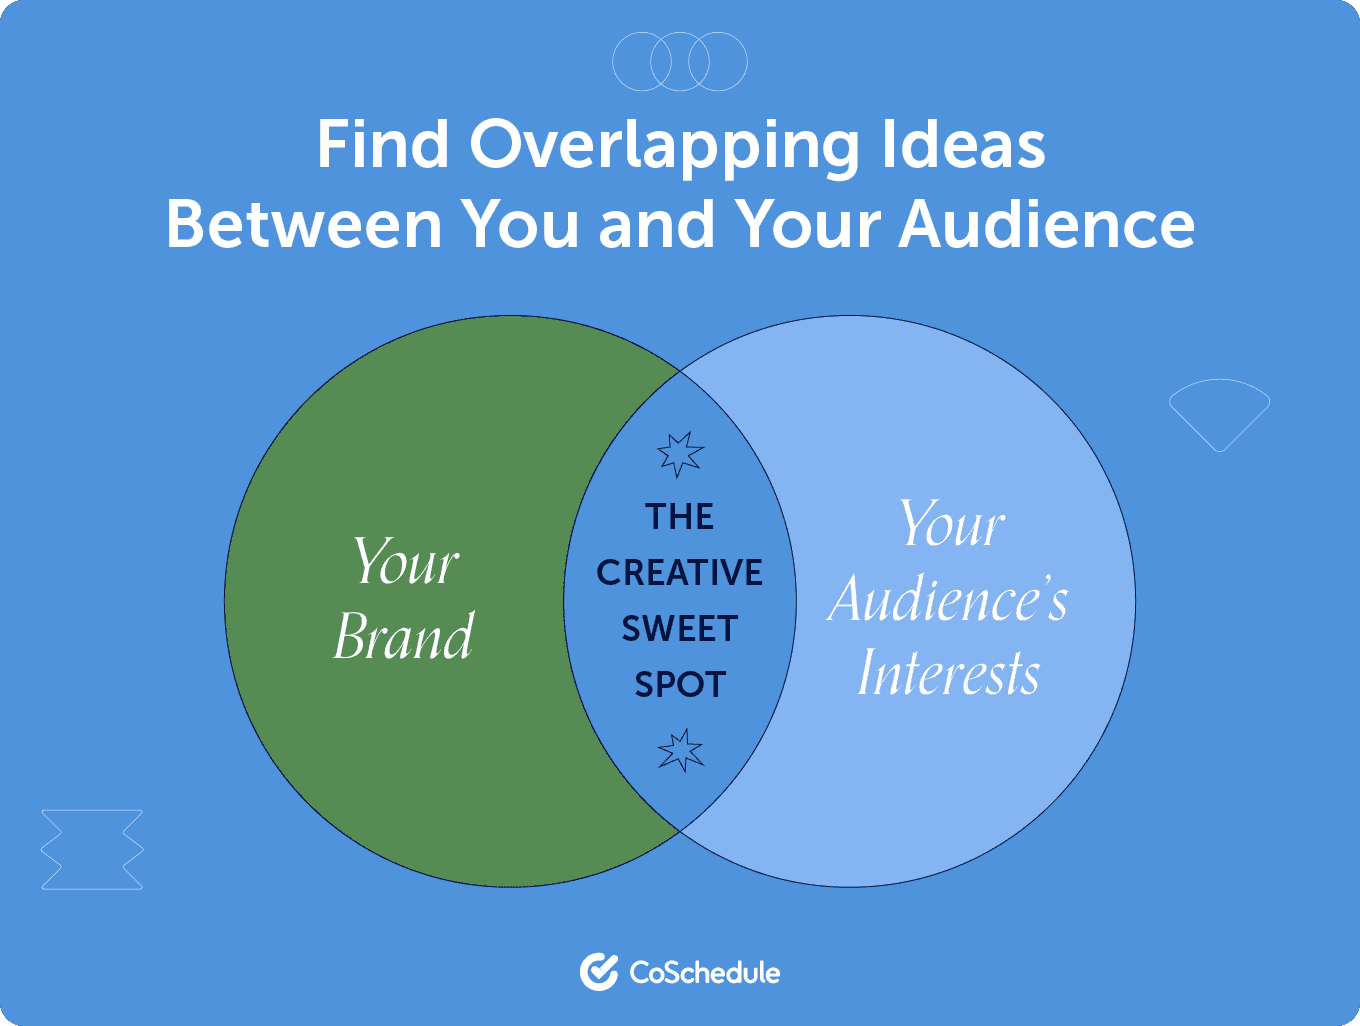 image of a venn diagram with "your brand" on one side and "your audience's interests on the on the other. "the creative sweet spot" is in the middle